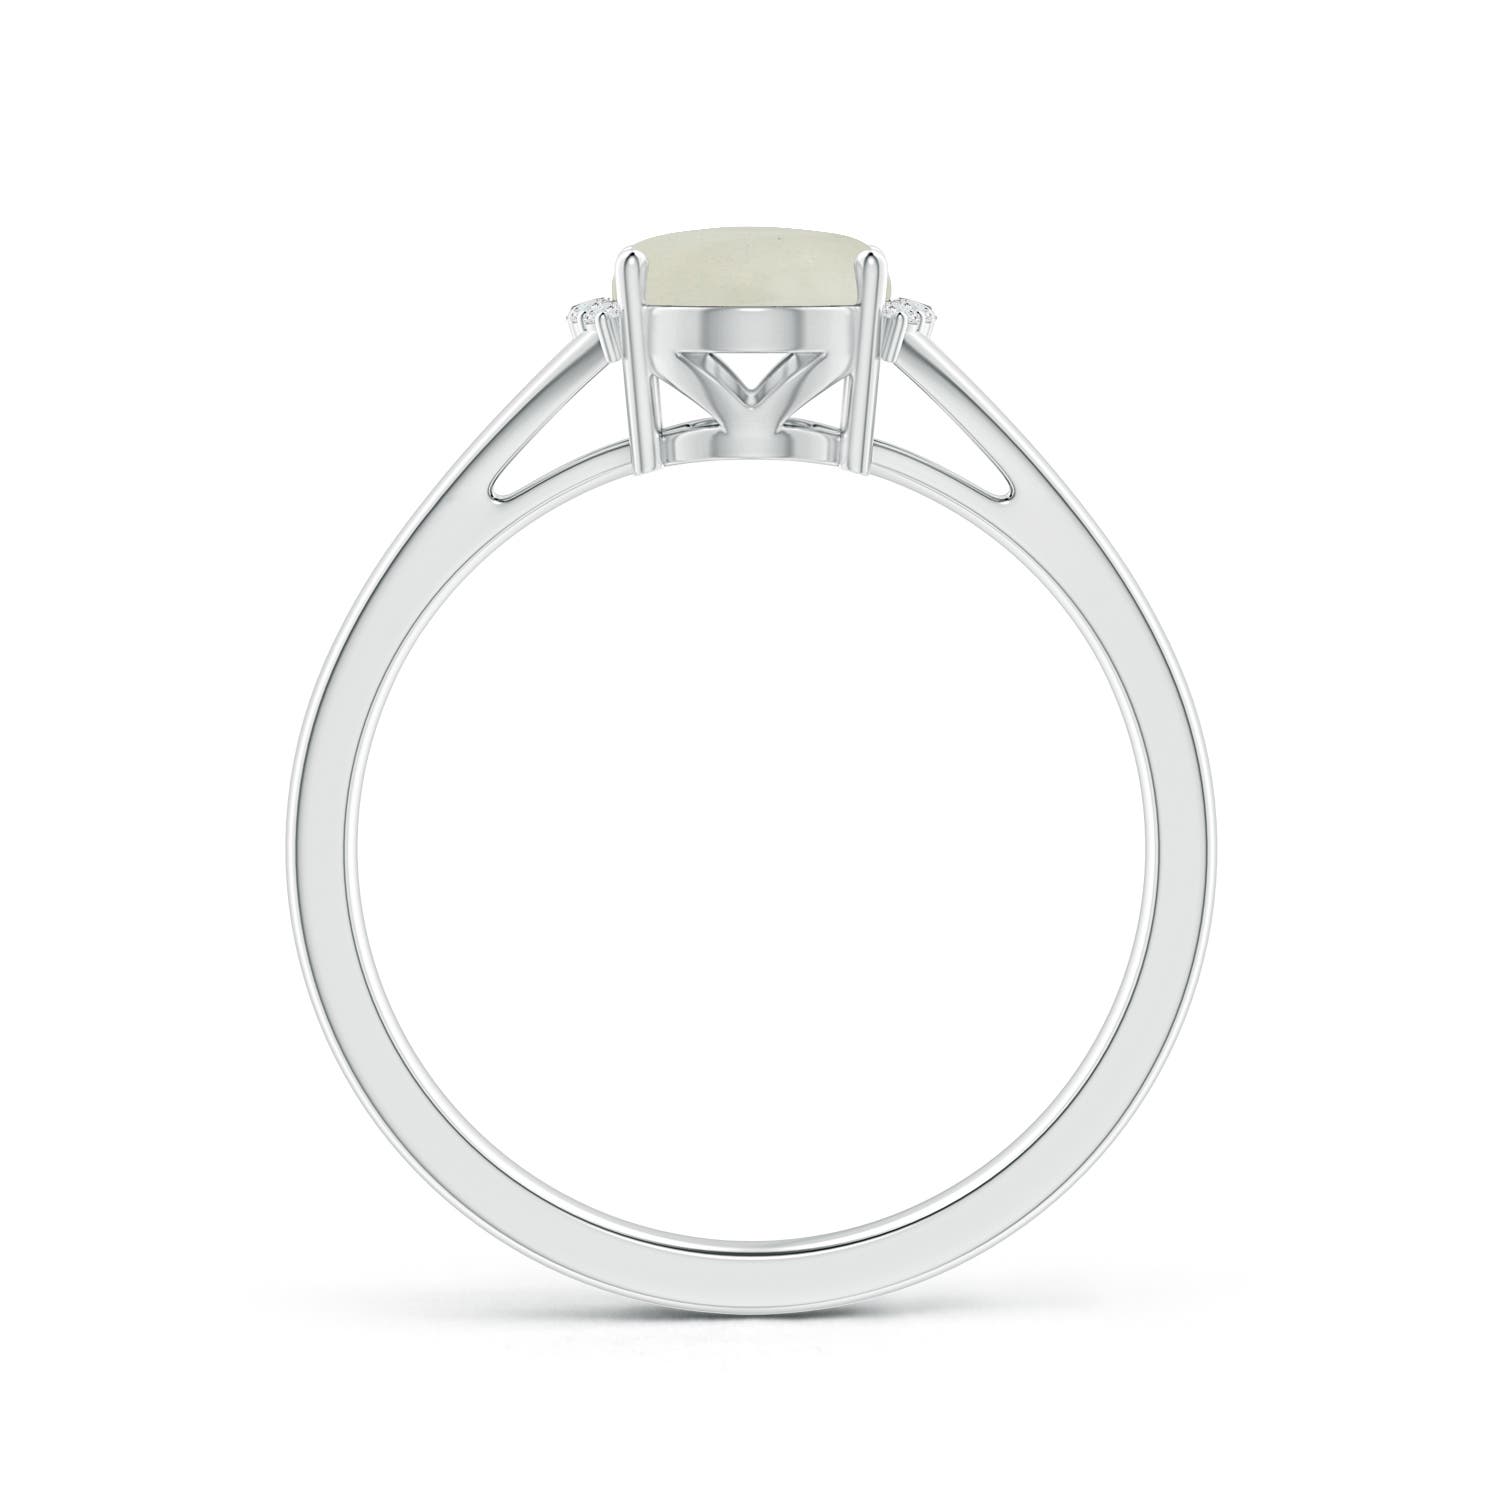 AA - Moonstone / 1.15 CT / 14 KT White Gold